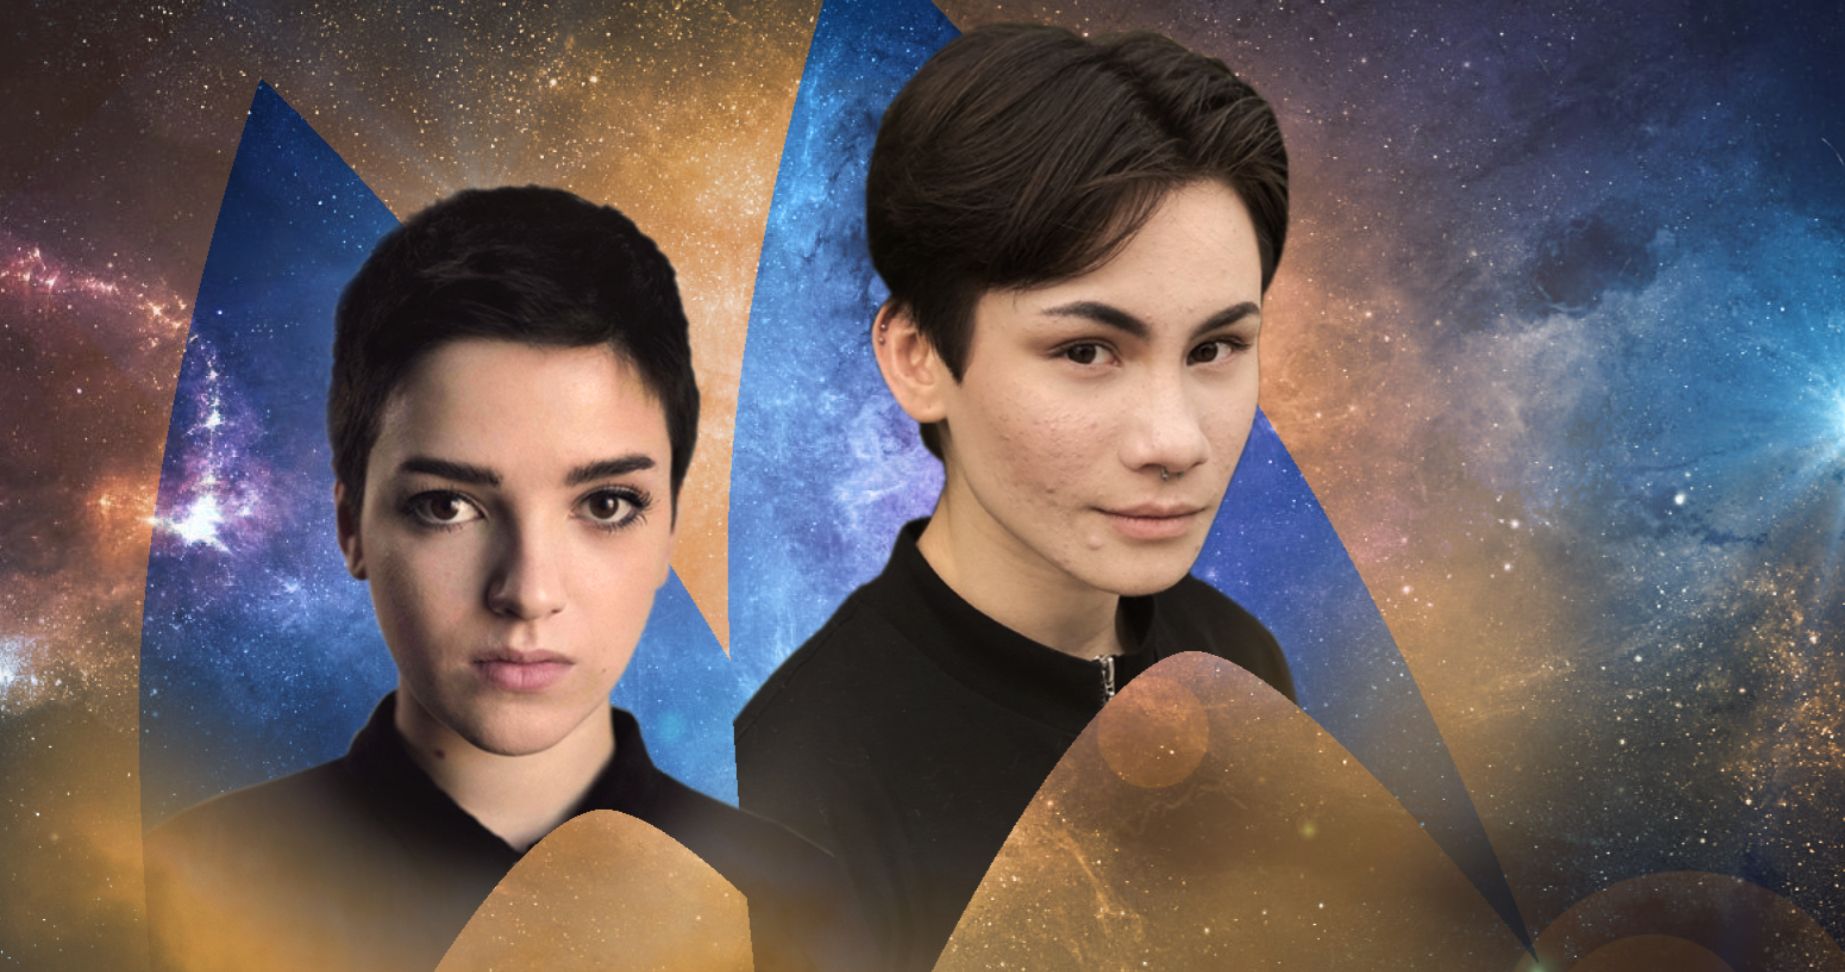 Star Trek: Discovery Season 3 Will Introduce Franchise's First Transgender and Non-Binary Characters